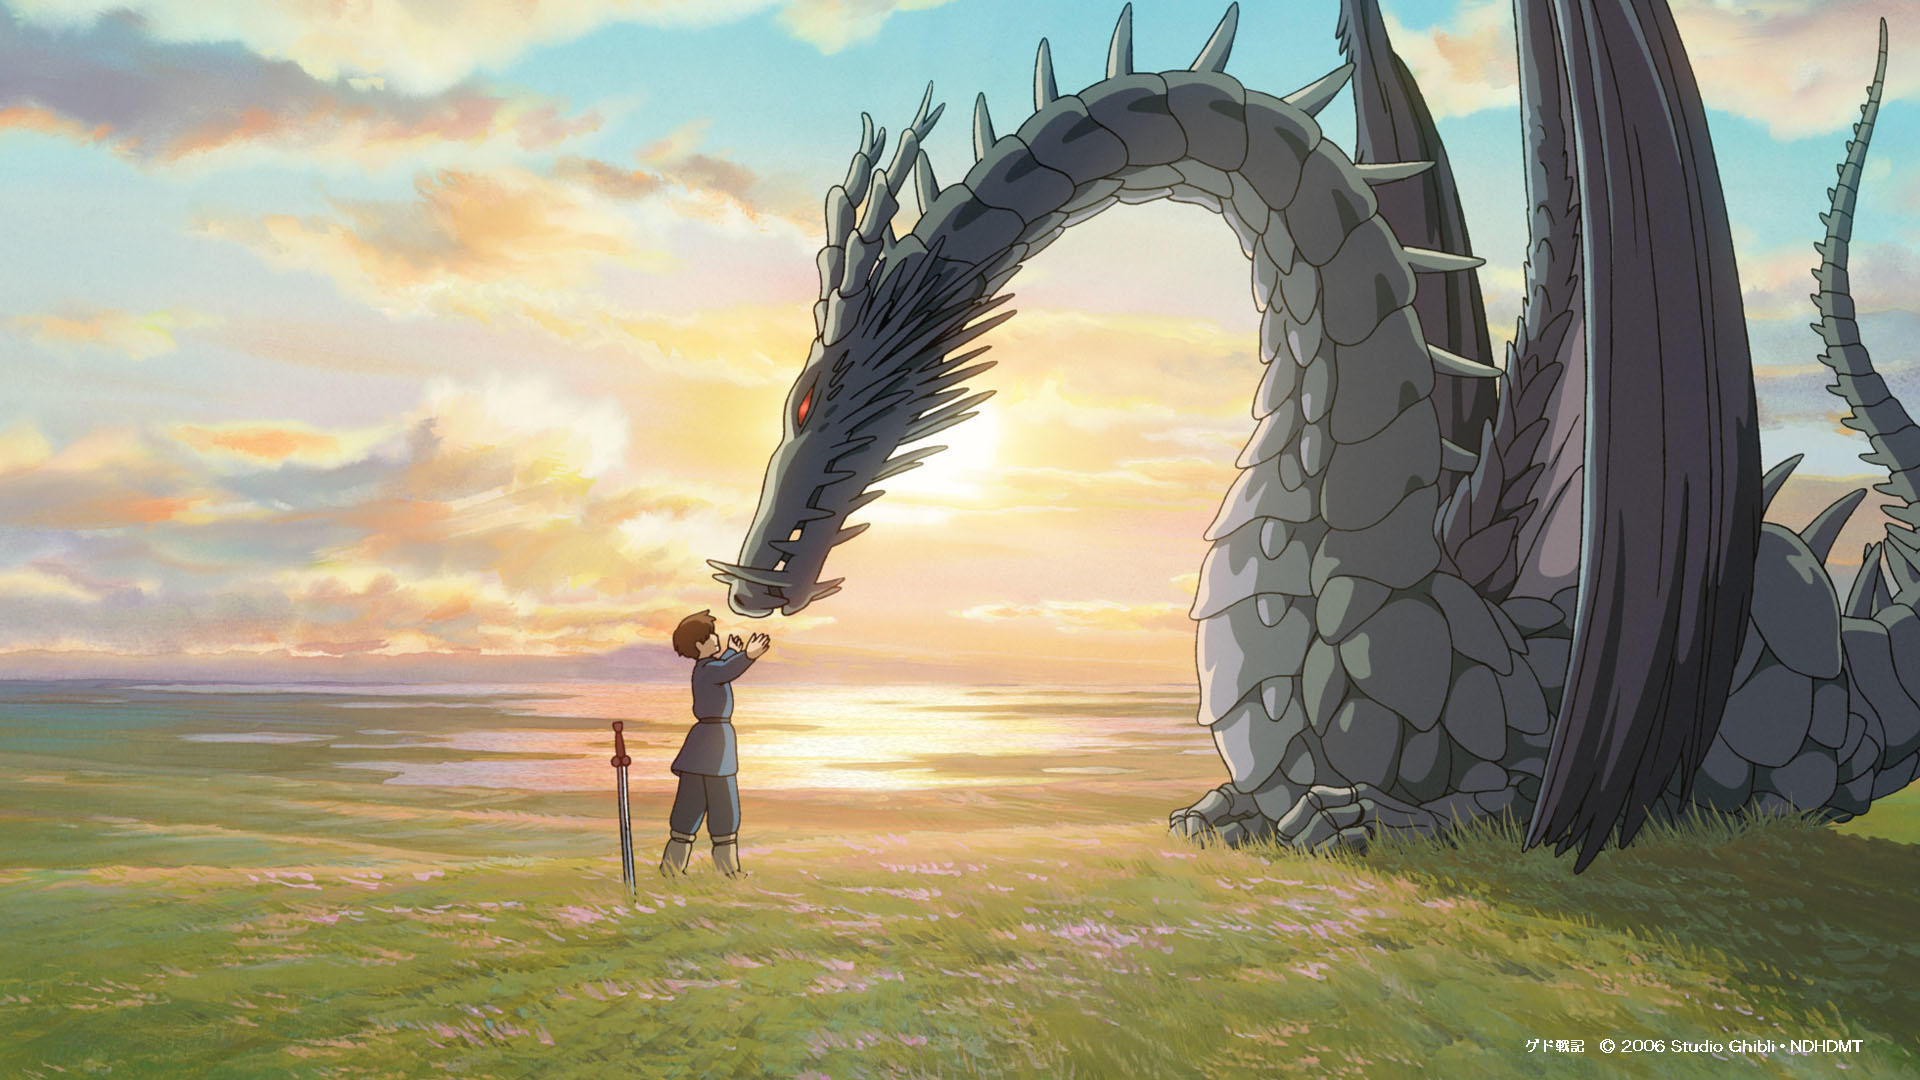 Download free Studio Ghibli wallpapers for your video chats and meetings